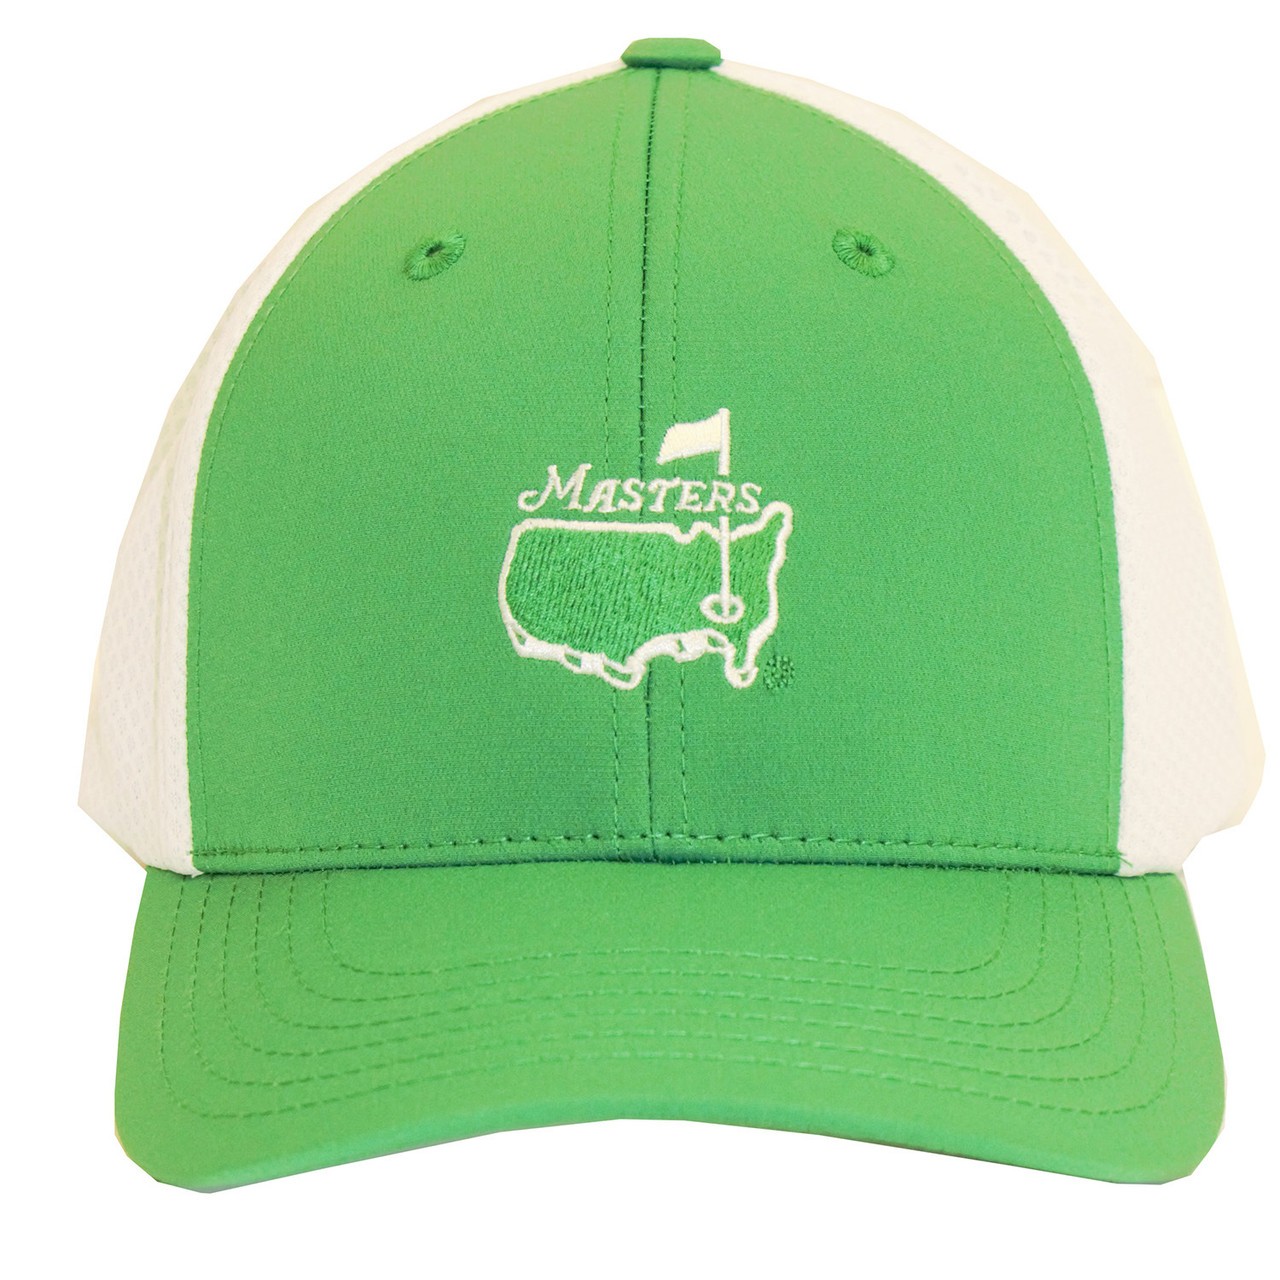 Masters Youth Green and White Hat with Mesh Back